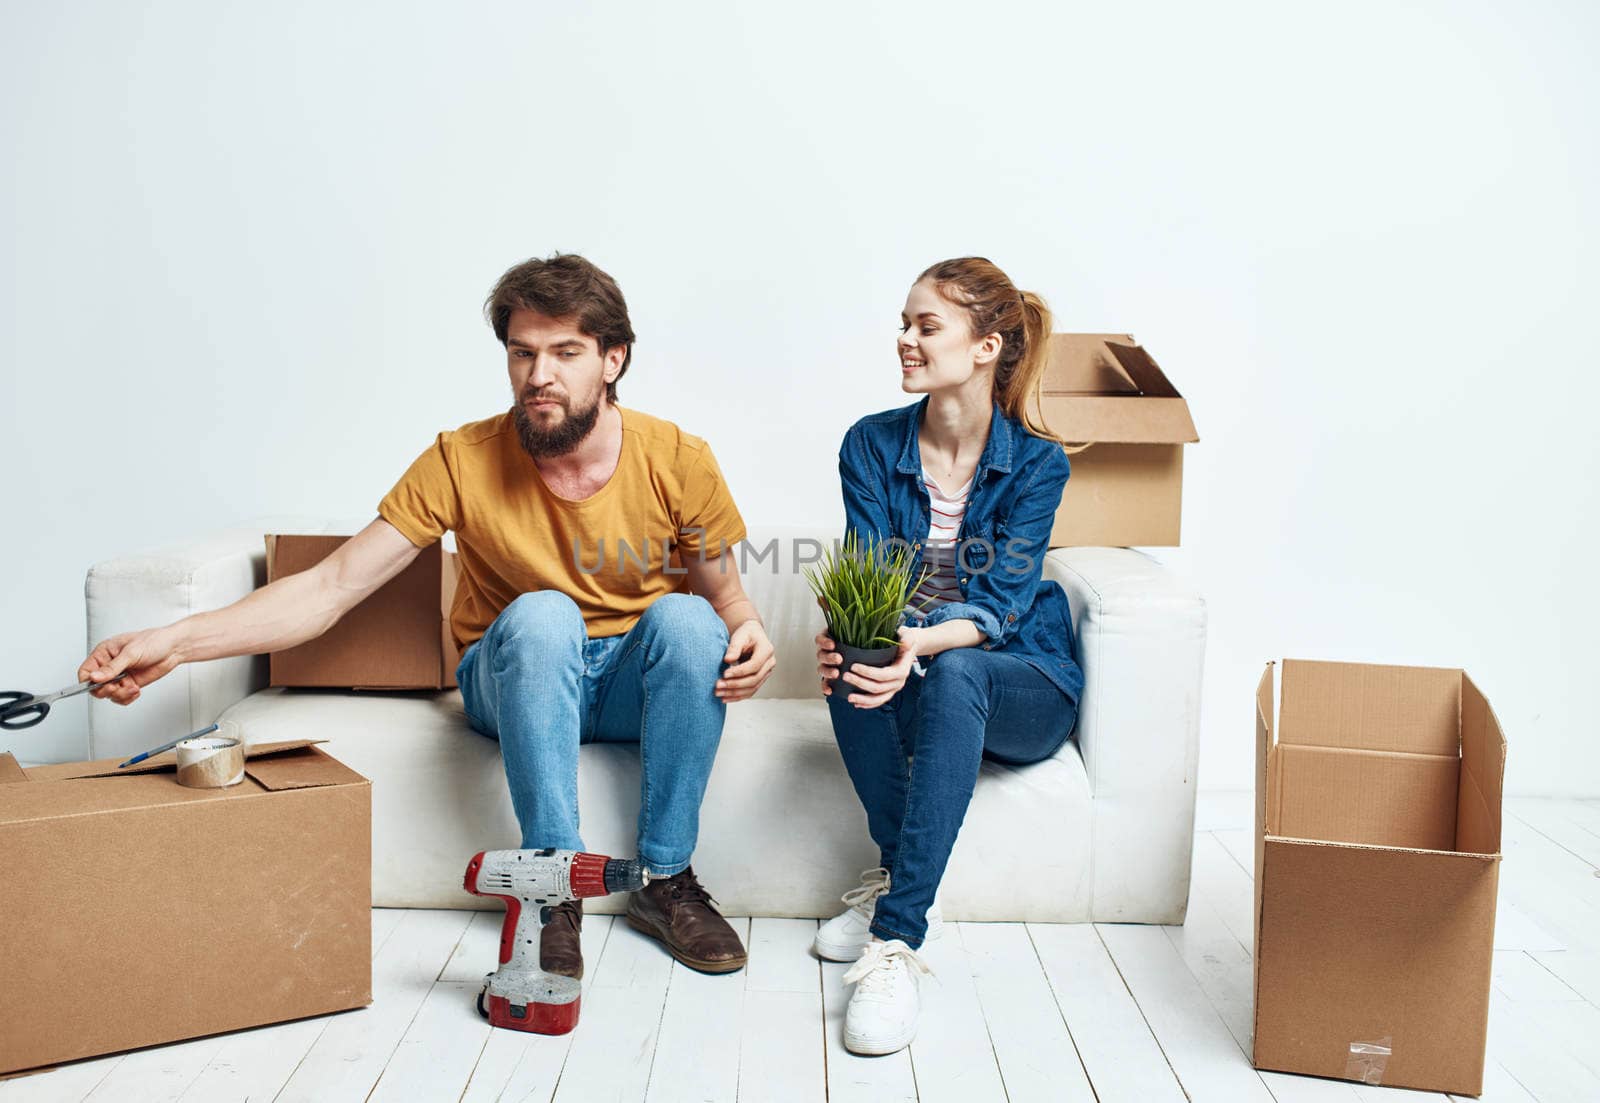 A man and a woman are sitting on the couch near the boxes with things moving the interior of the room. High quality photo